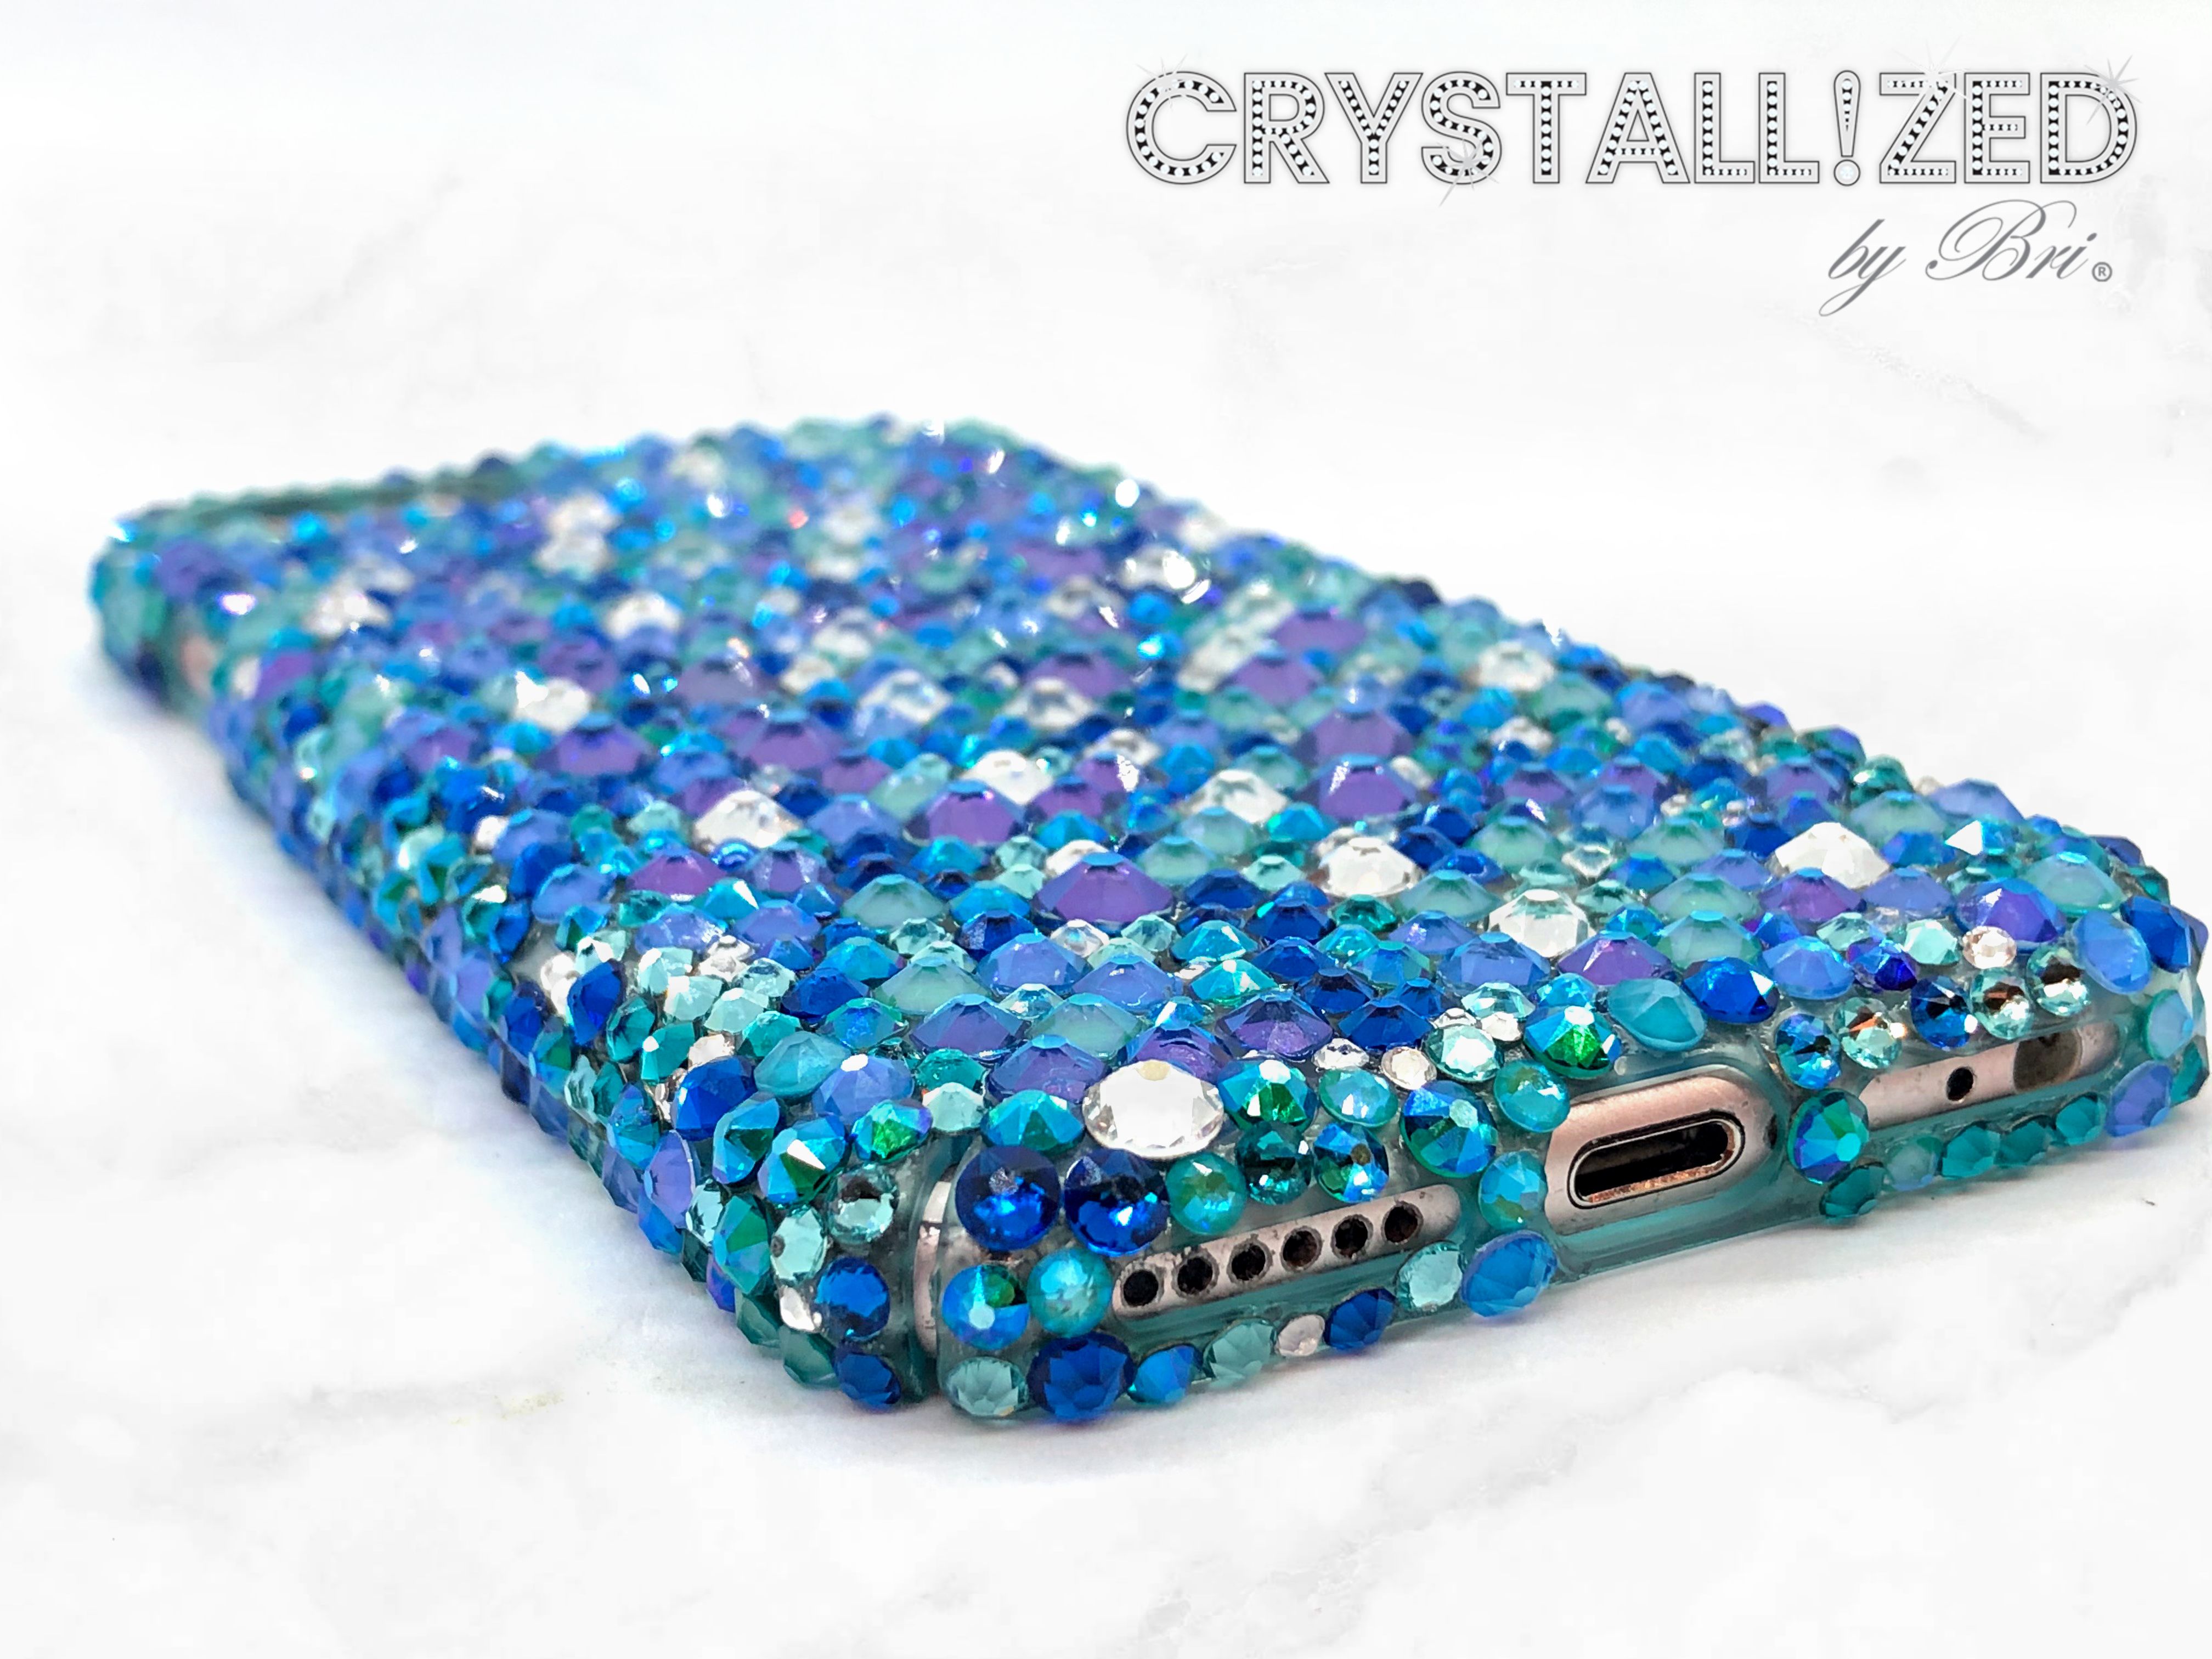 Bedazzled Phone Case - FJA Crafts